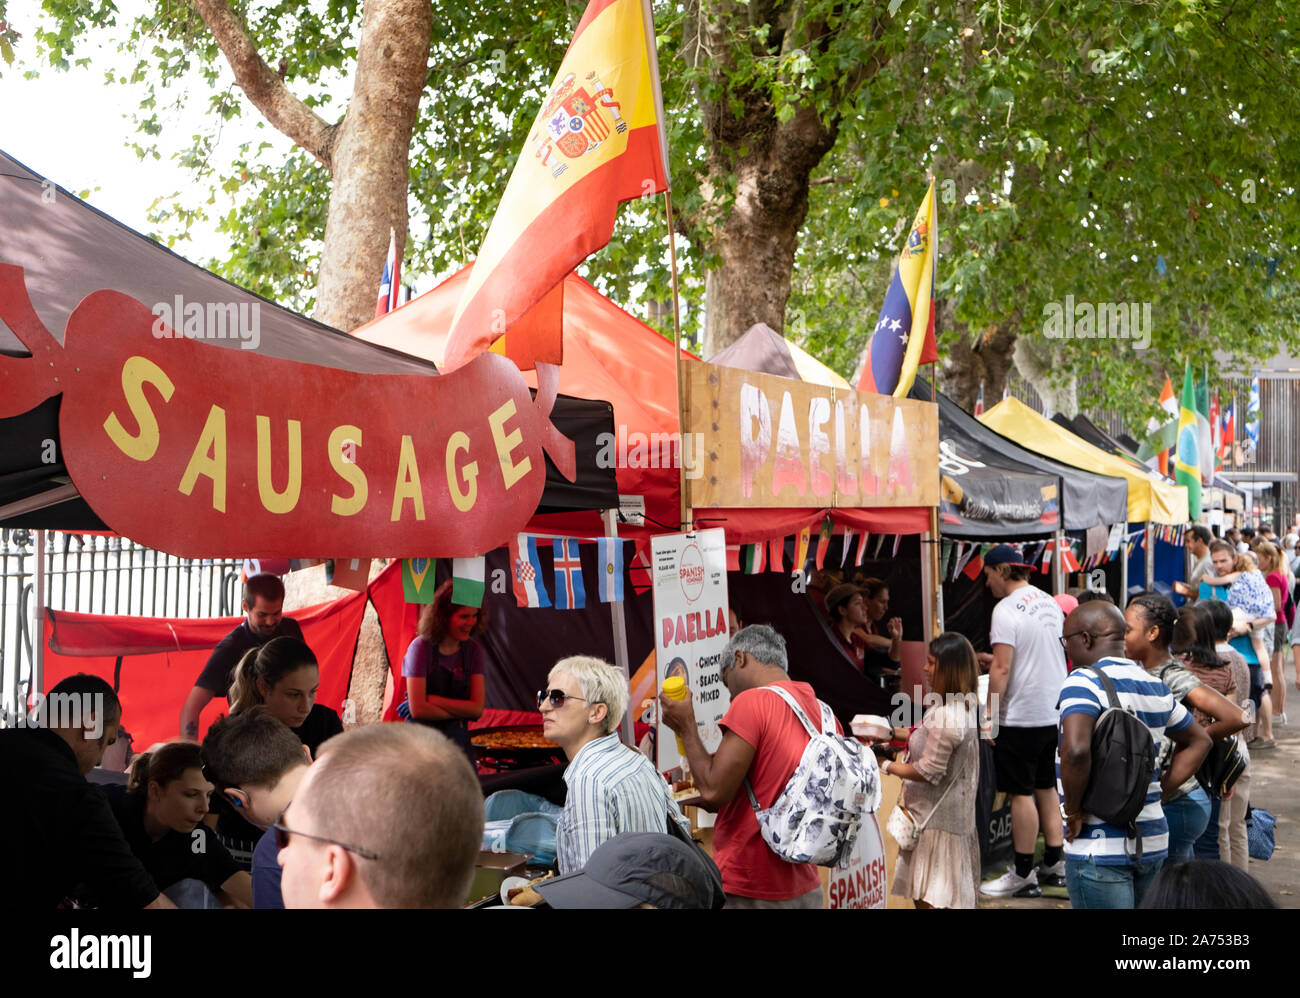 International food festival at Greenwich, London, UK. Vendors selling street food from different countries. Stock Photo